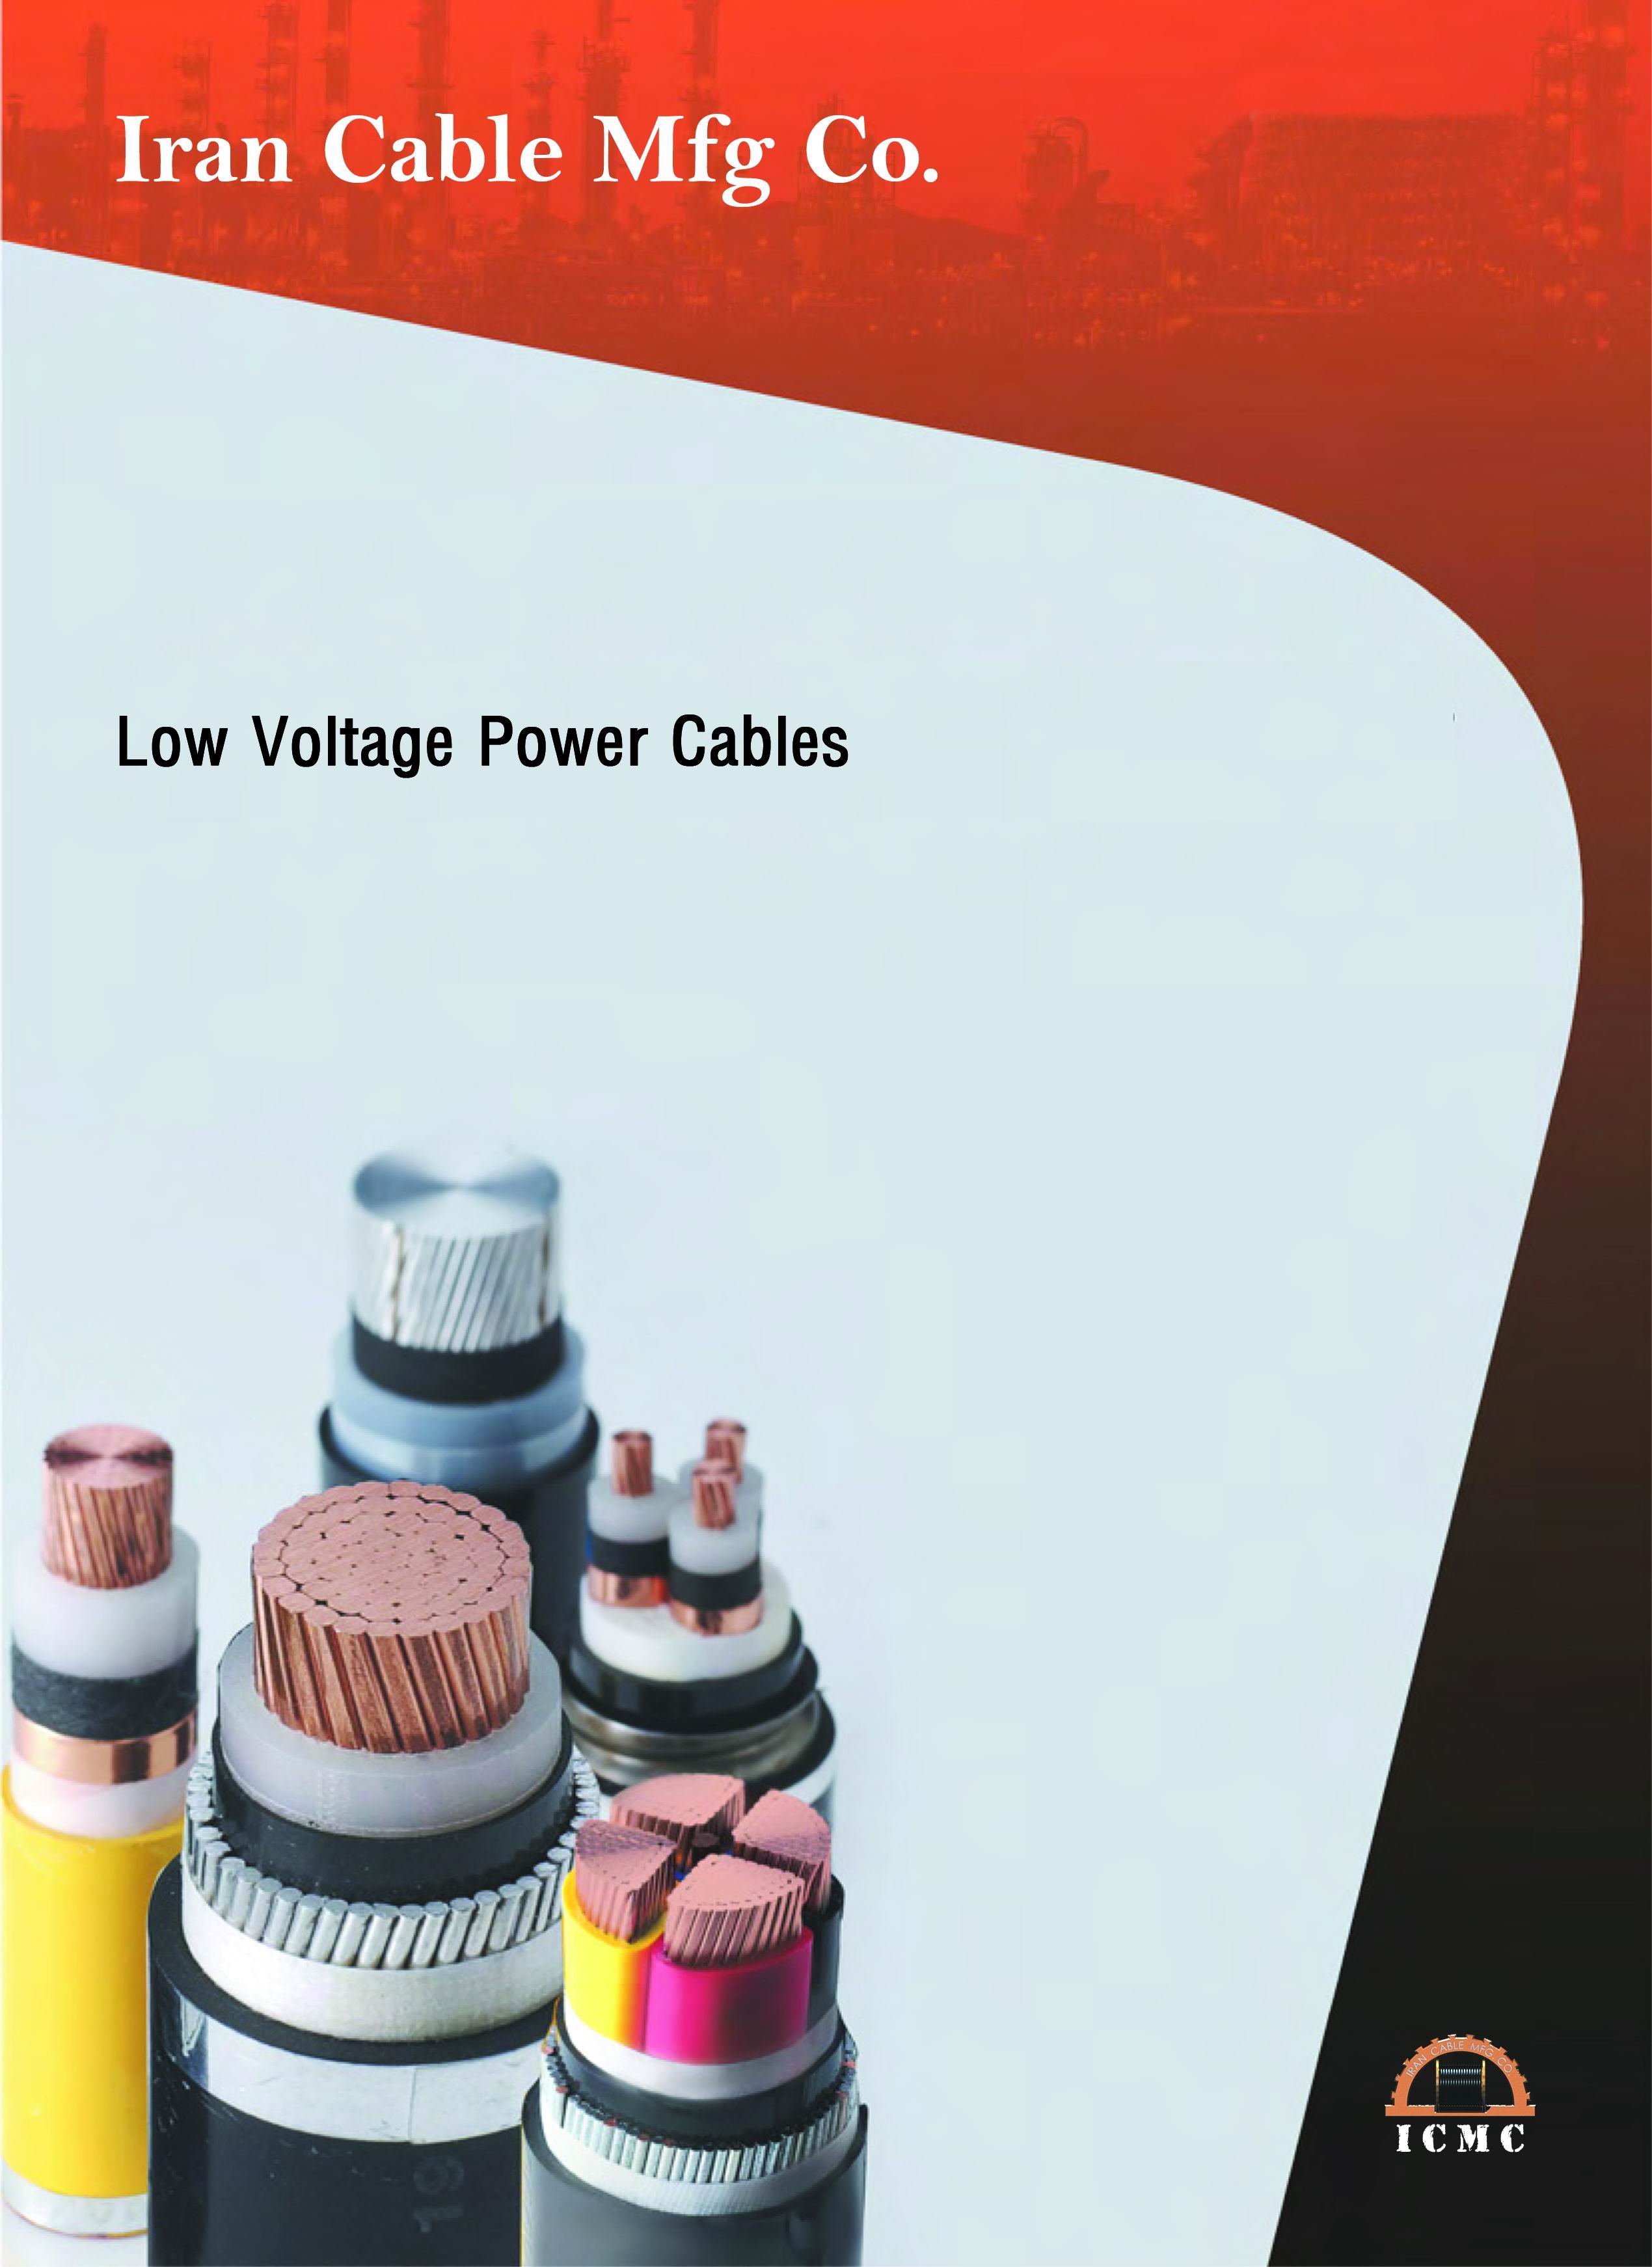 Low pressure cables